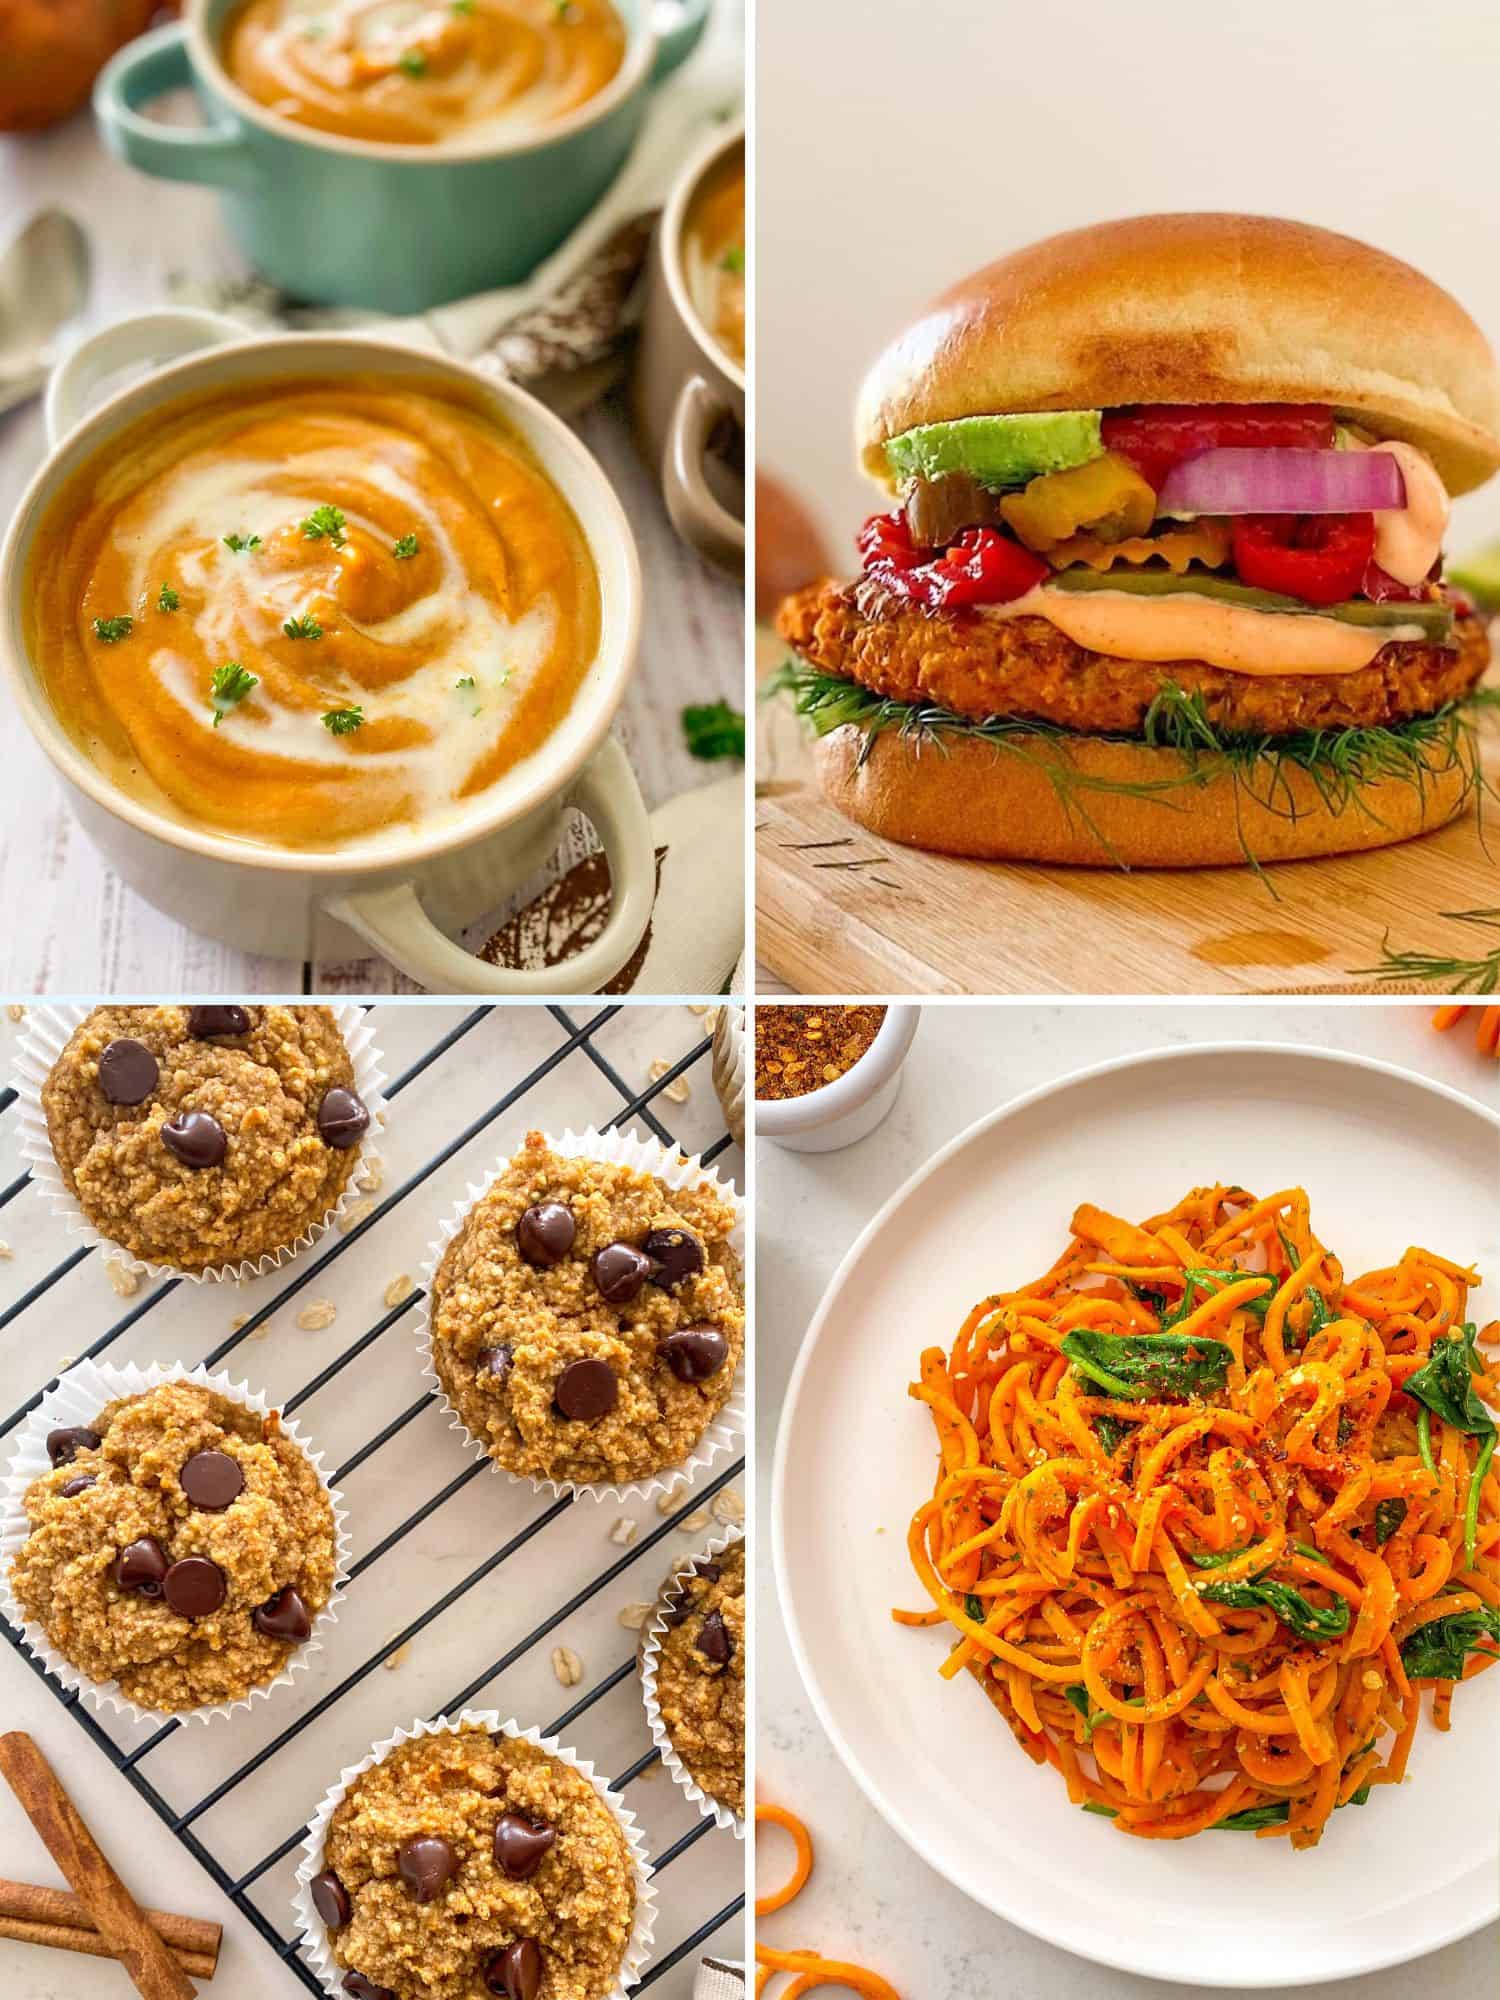 Collage of soup, burger, muffins and sweet potato noodles pictures.